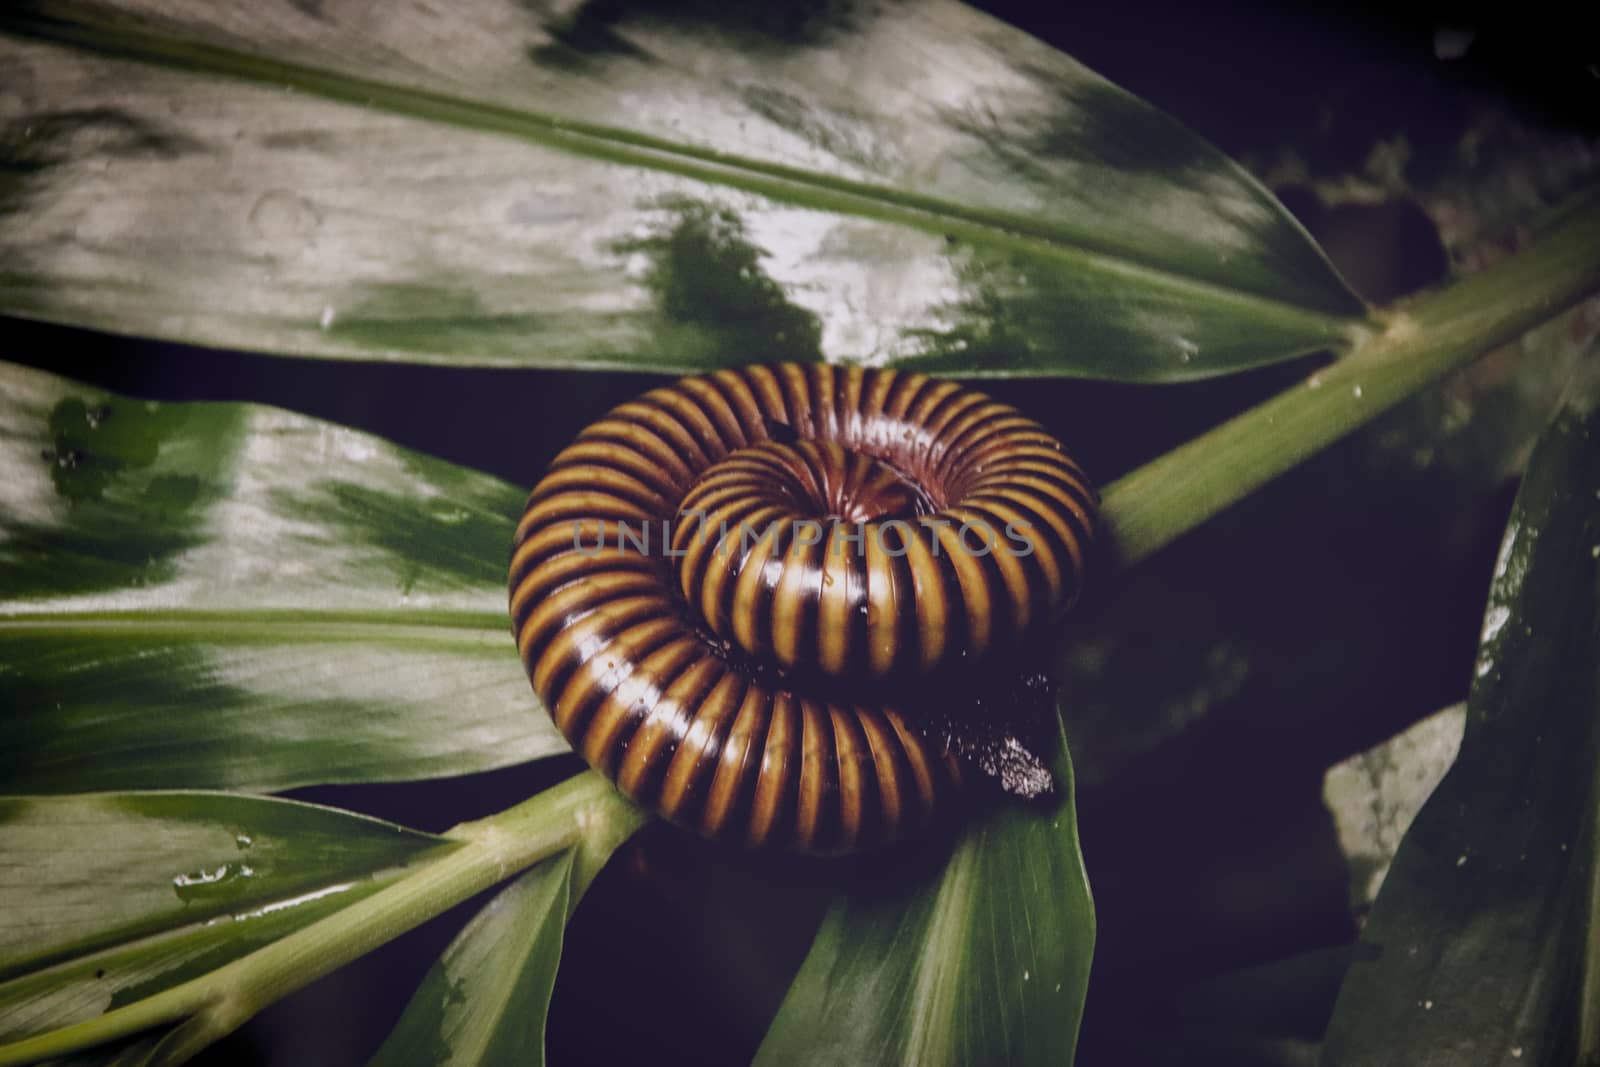 An Asian Millipede curled up on top of a leaf